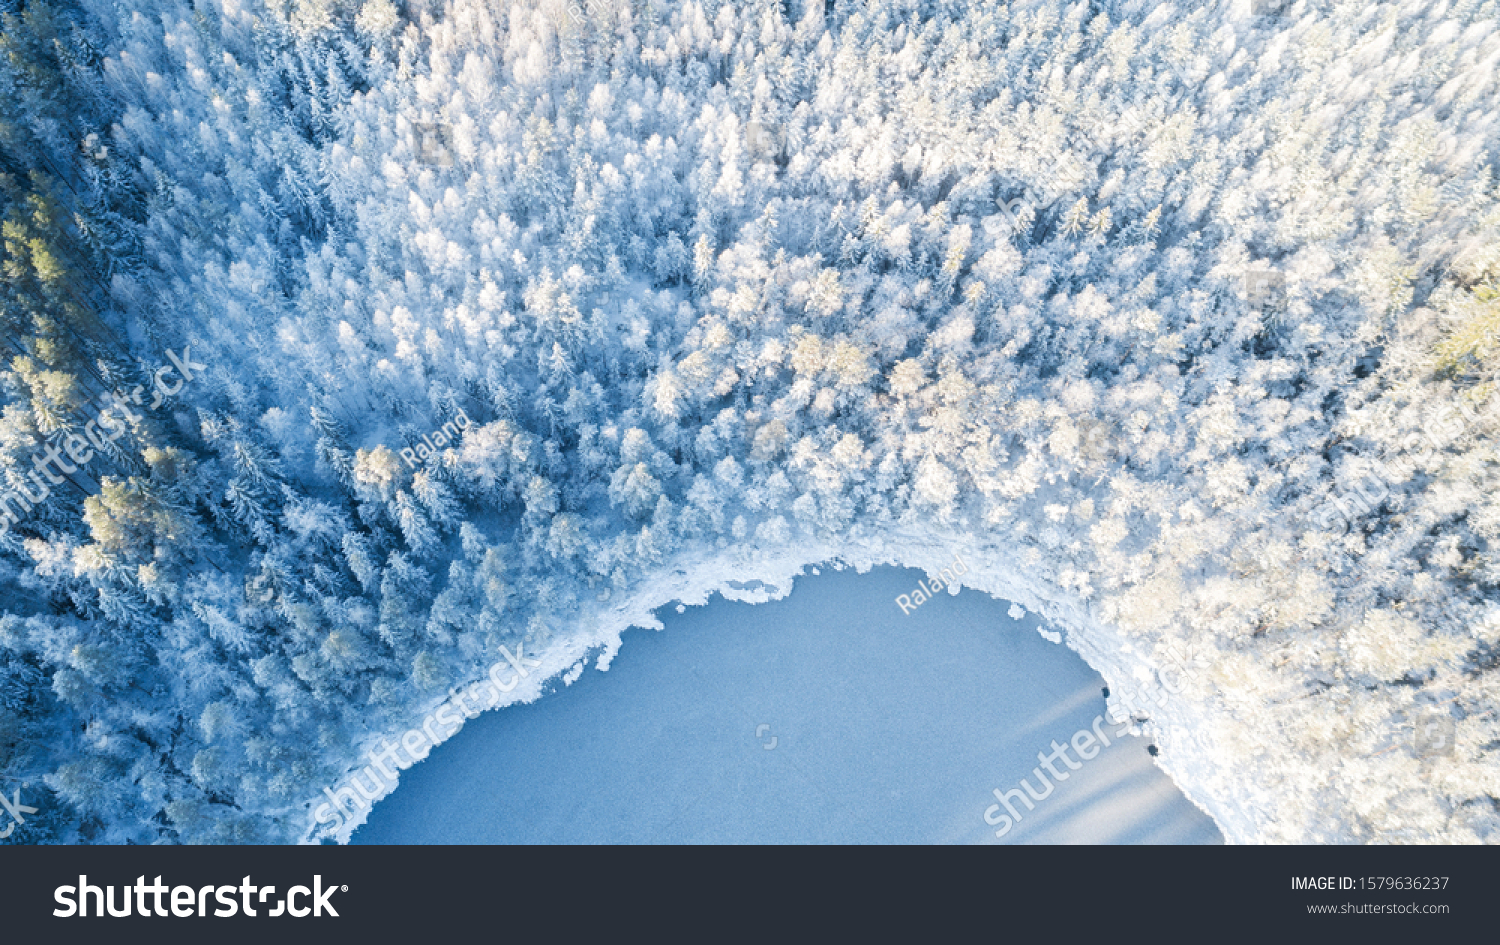 Аerial view of snow covered forest around beautiful lake. Rime ice and hoar frost covering trees. Scenic winter landscape near Helsinki, Finland. #1579636237